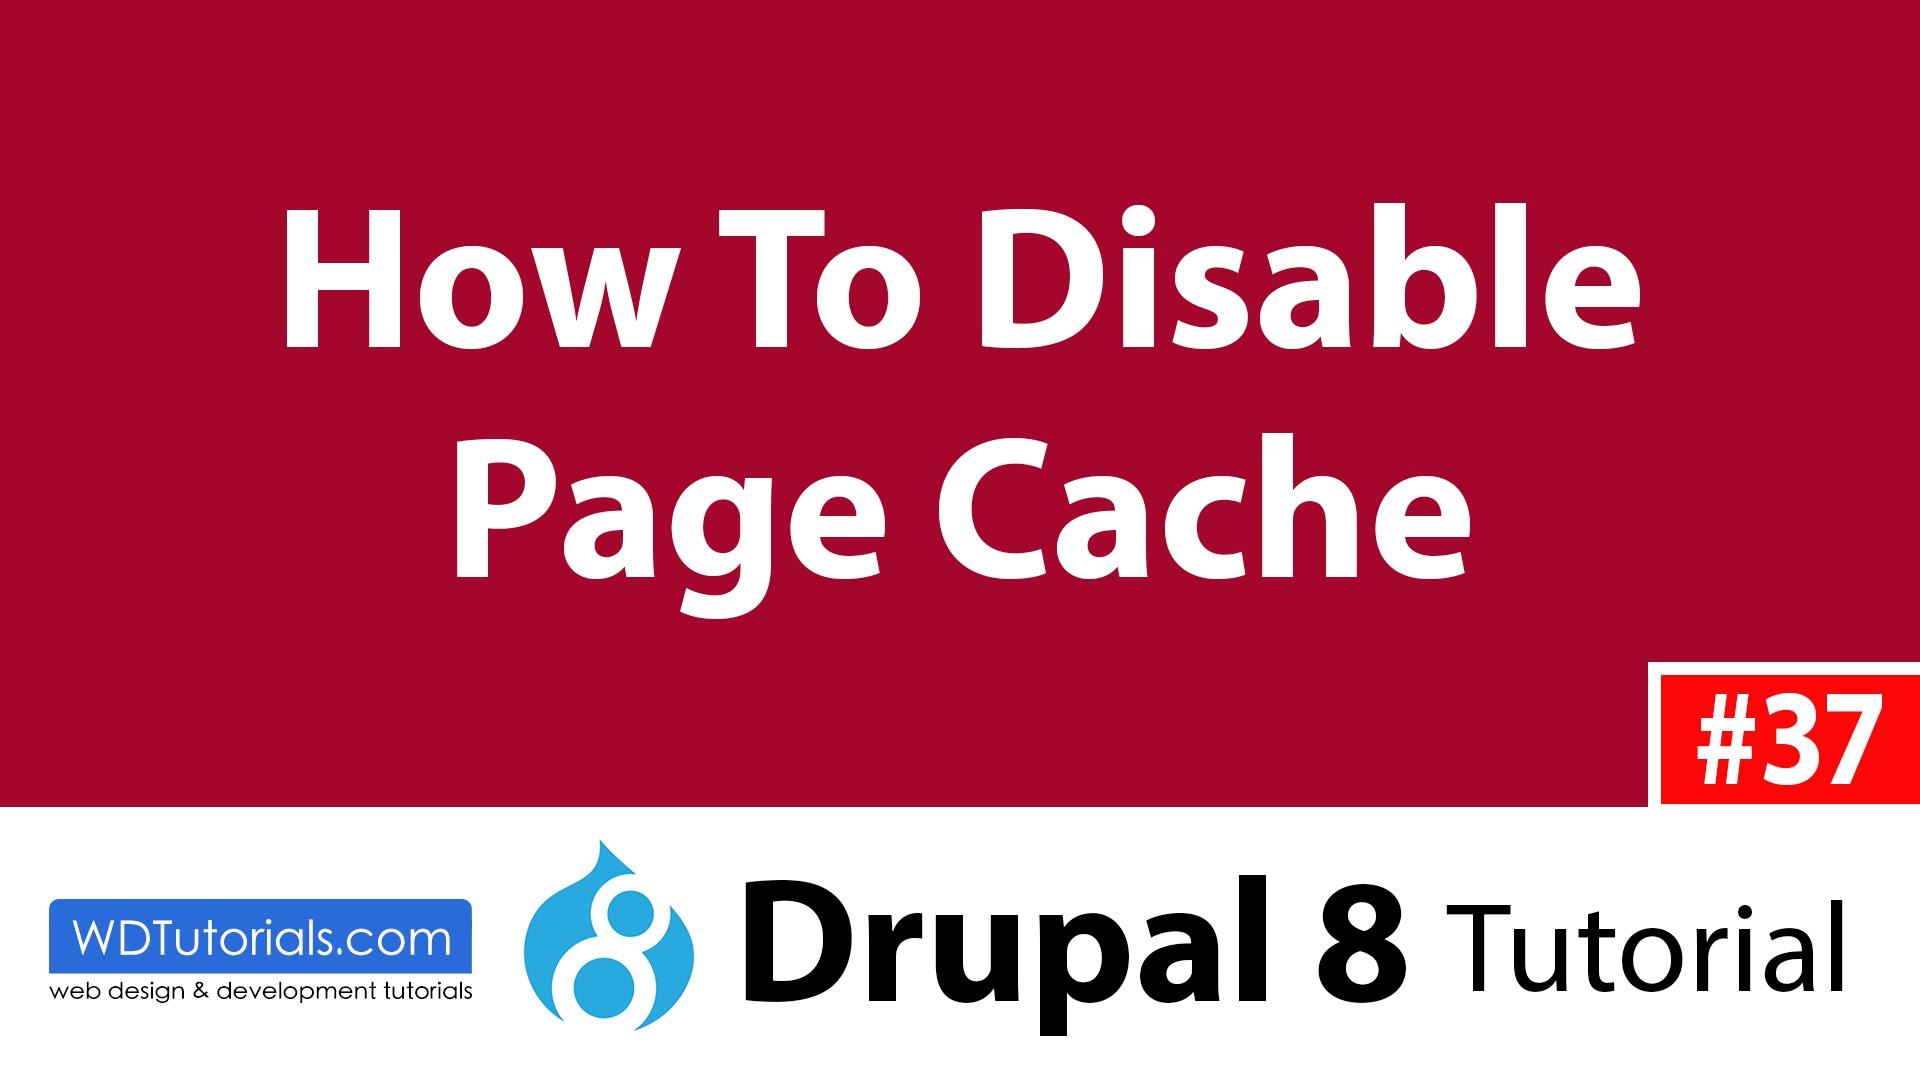 How to disable page cache